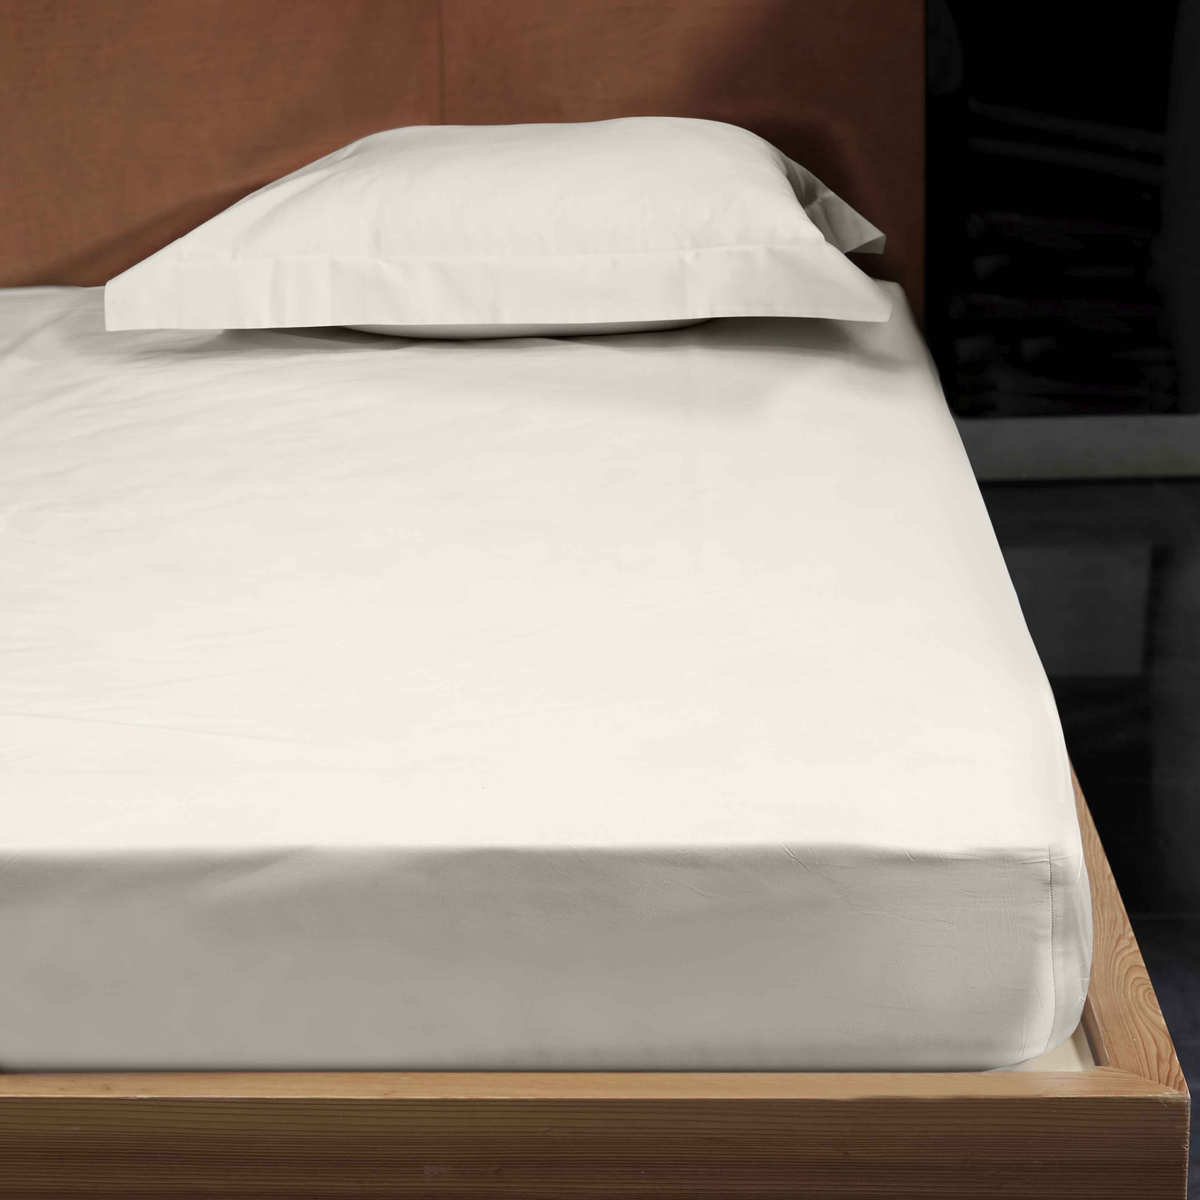 Fitted Sheet of Signoria Luce Bedding in Ivory Color